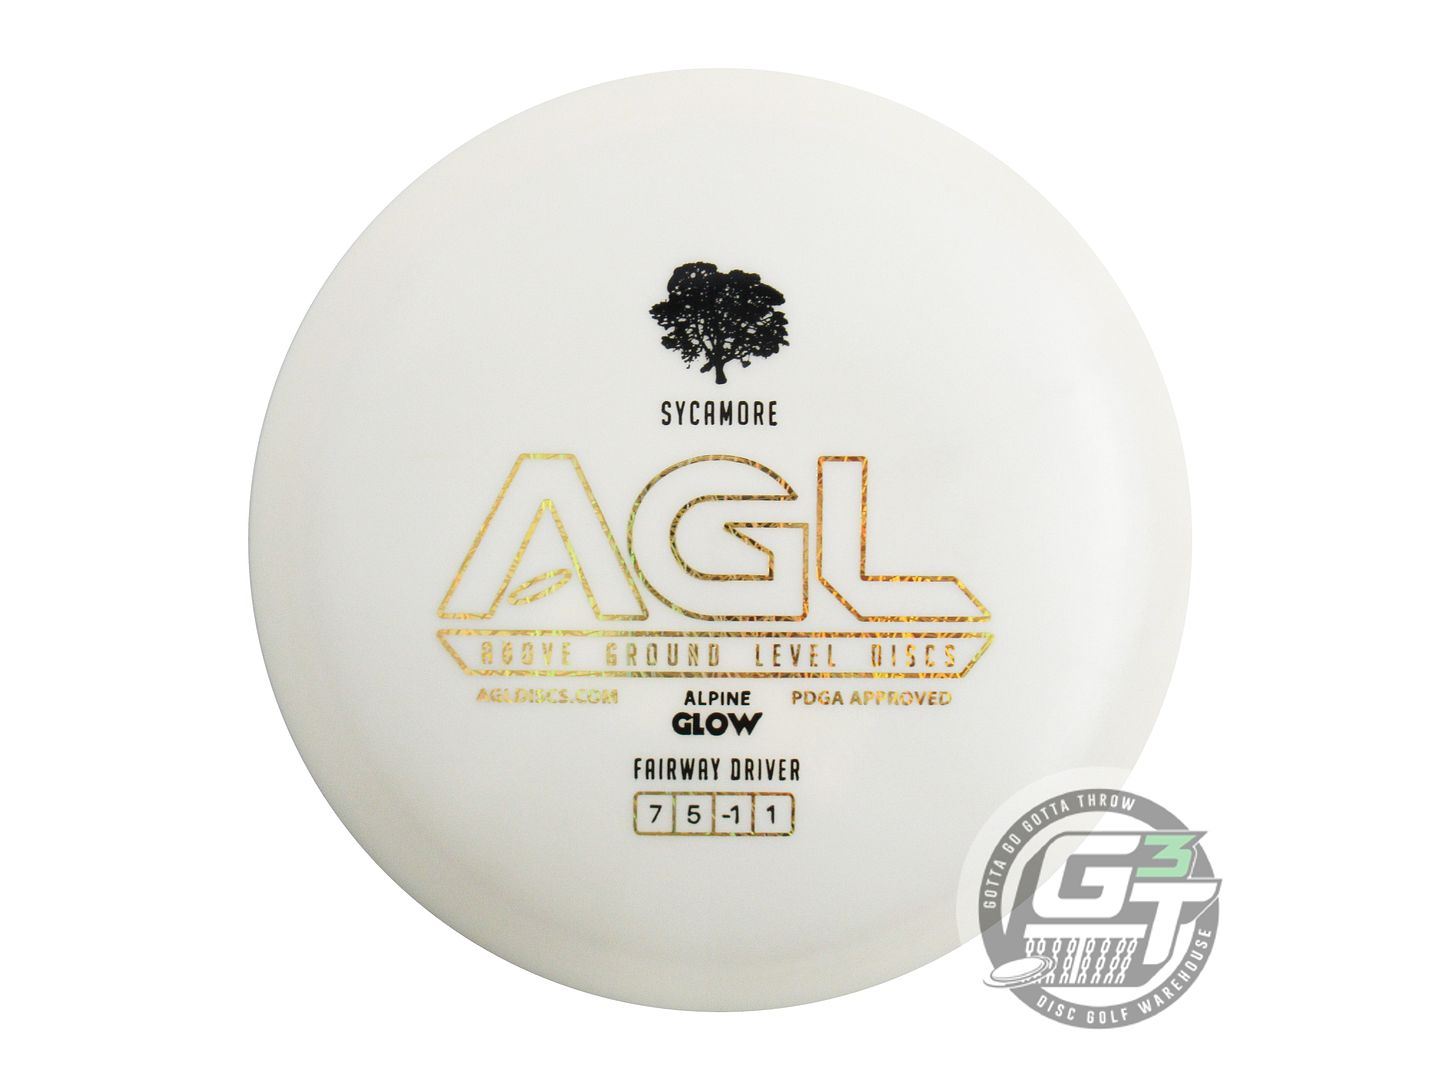 Above Ground Level Glow Alpine Sycamore Fairway Driver Golf Disc (Individually Listed)